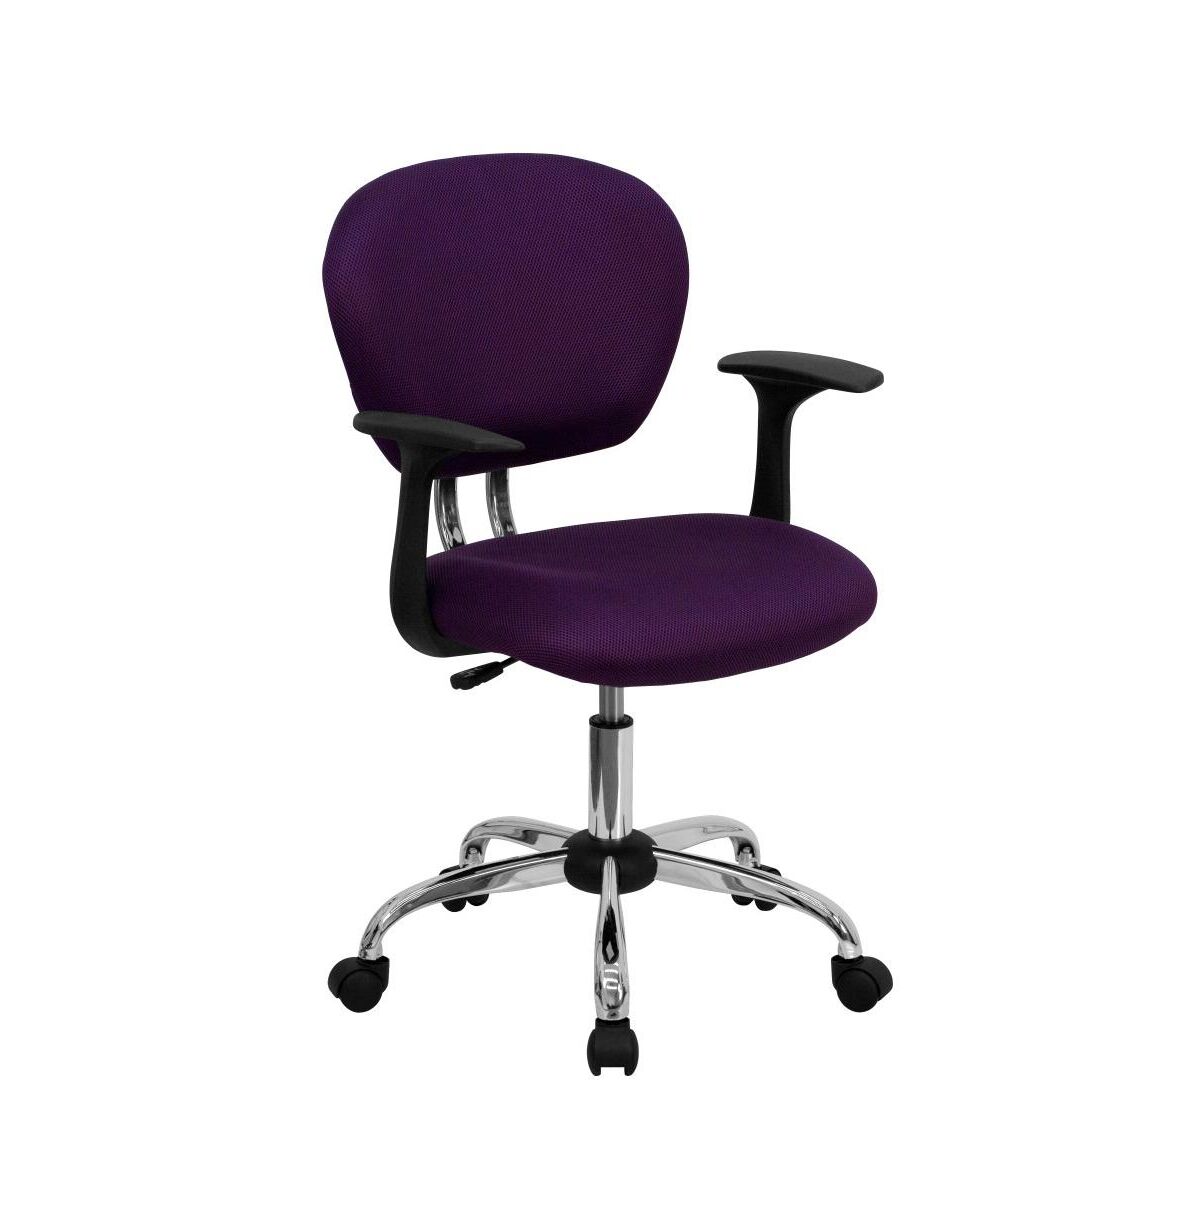 Emma+oliver Mid-Back Mesh Padded Swivel Task Office Chair With Chrome Base And Arms - Purple